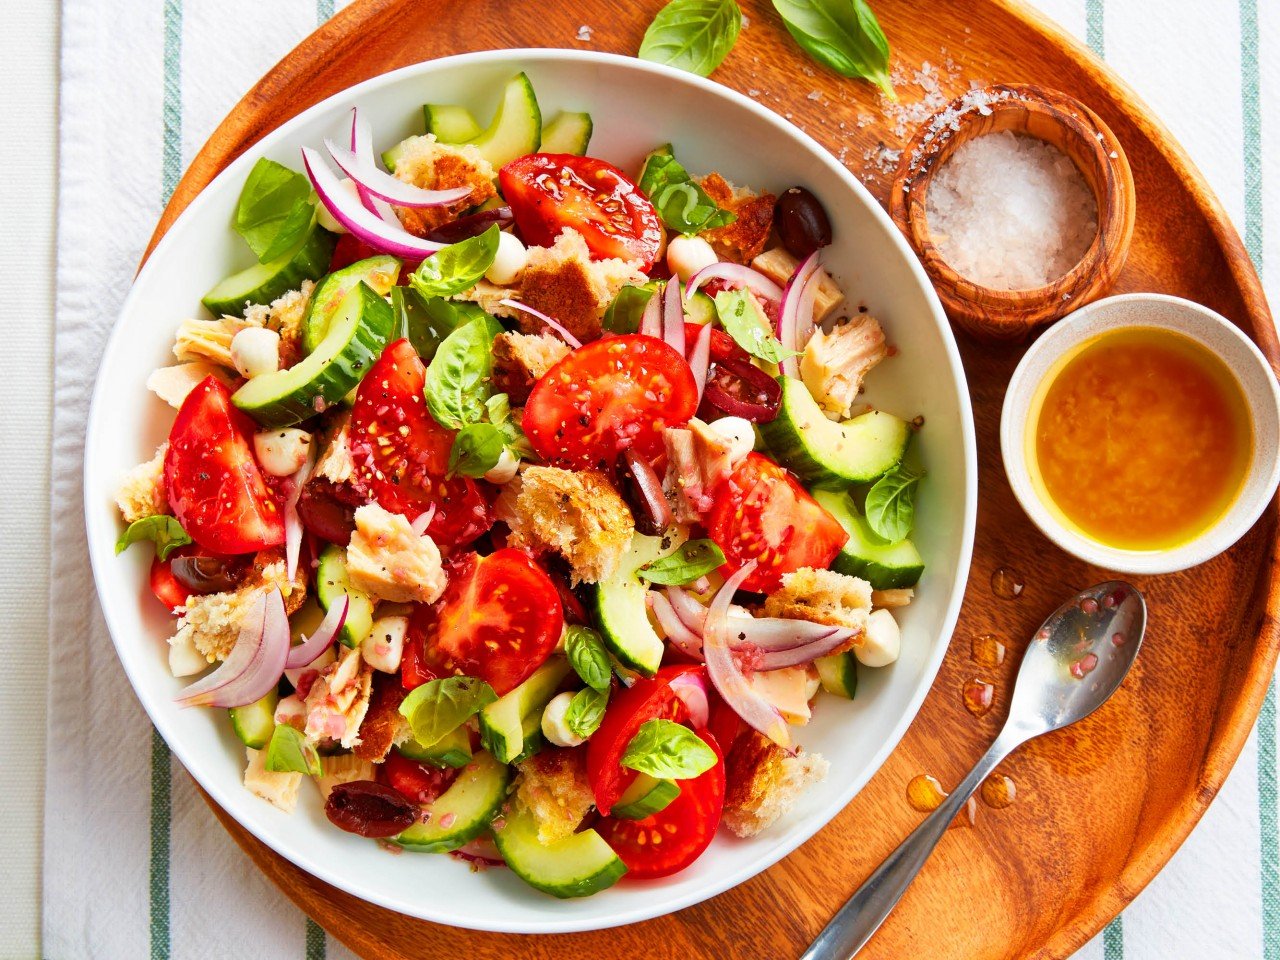 Summer dinner recipes like this Tuna panzanella salad are irresistible. Served in large white bowl on a circular wooden platter